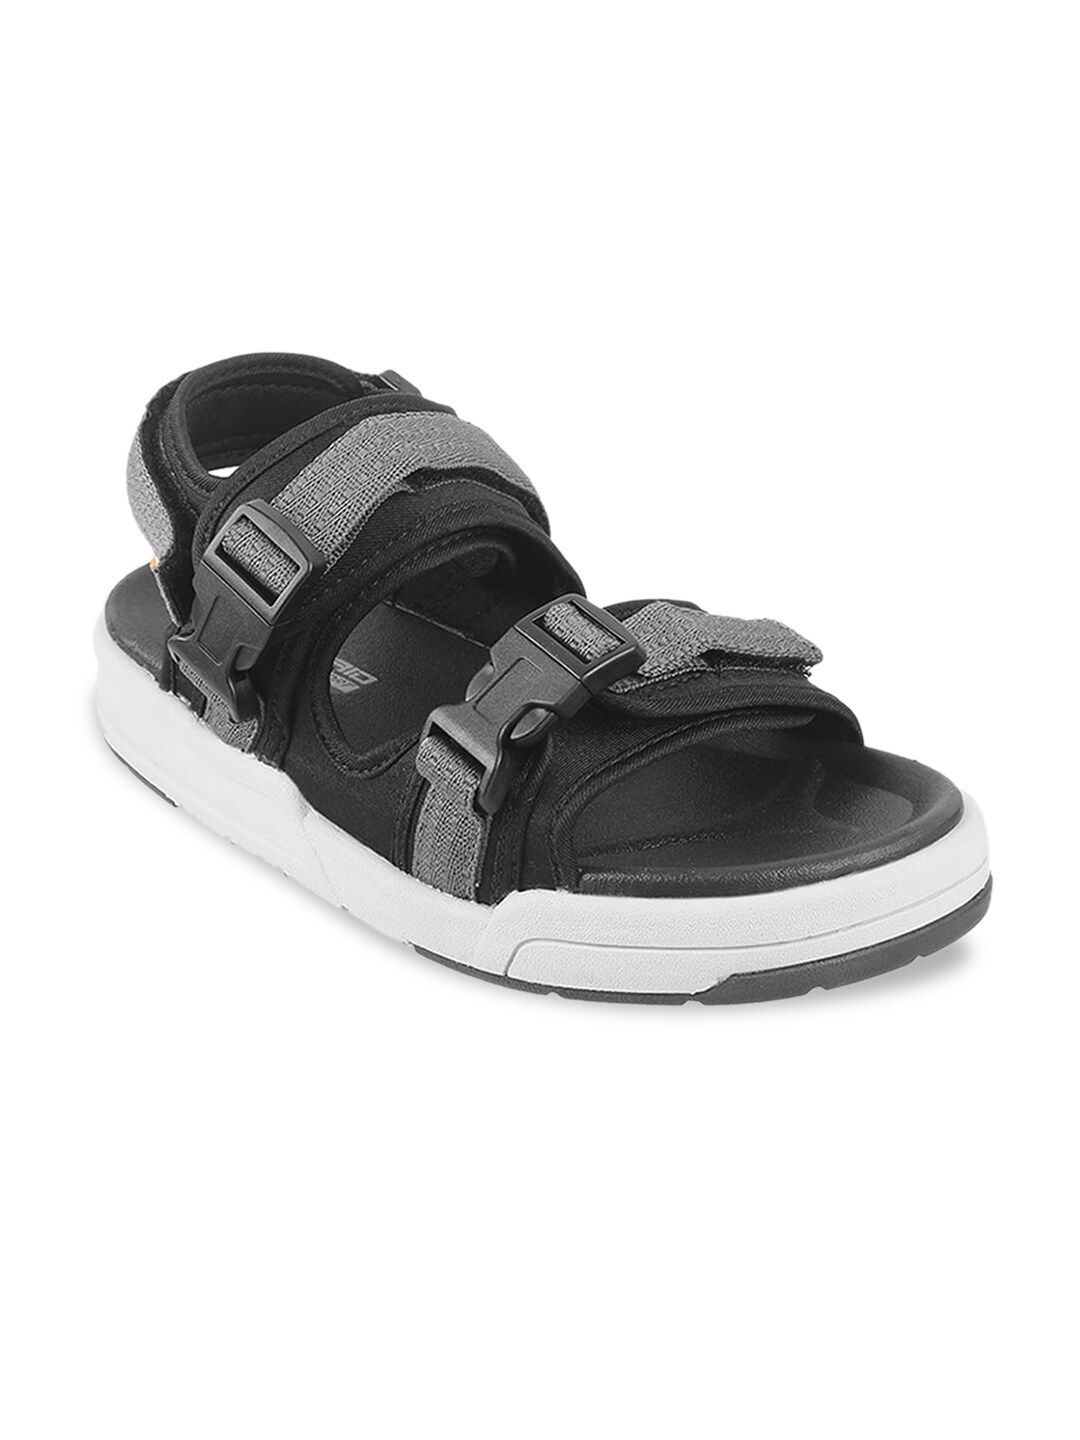 Vento Grey & White Solid Sports Sandals Price in India